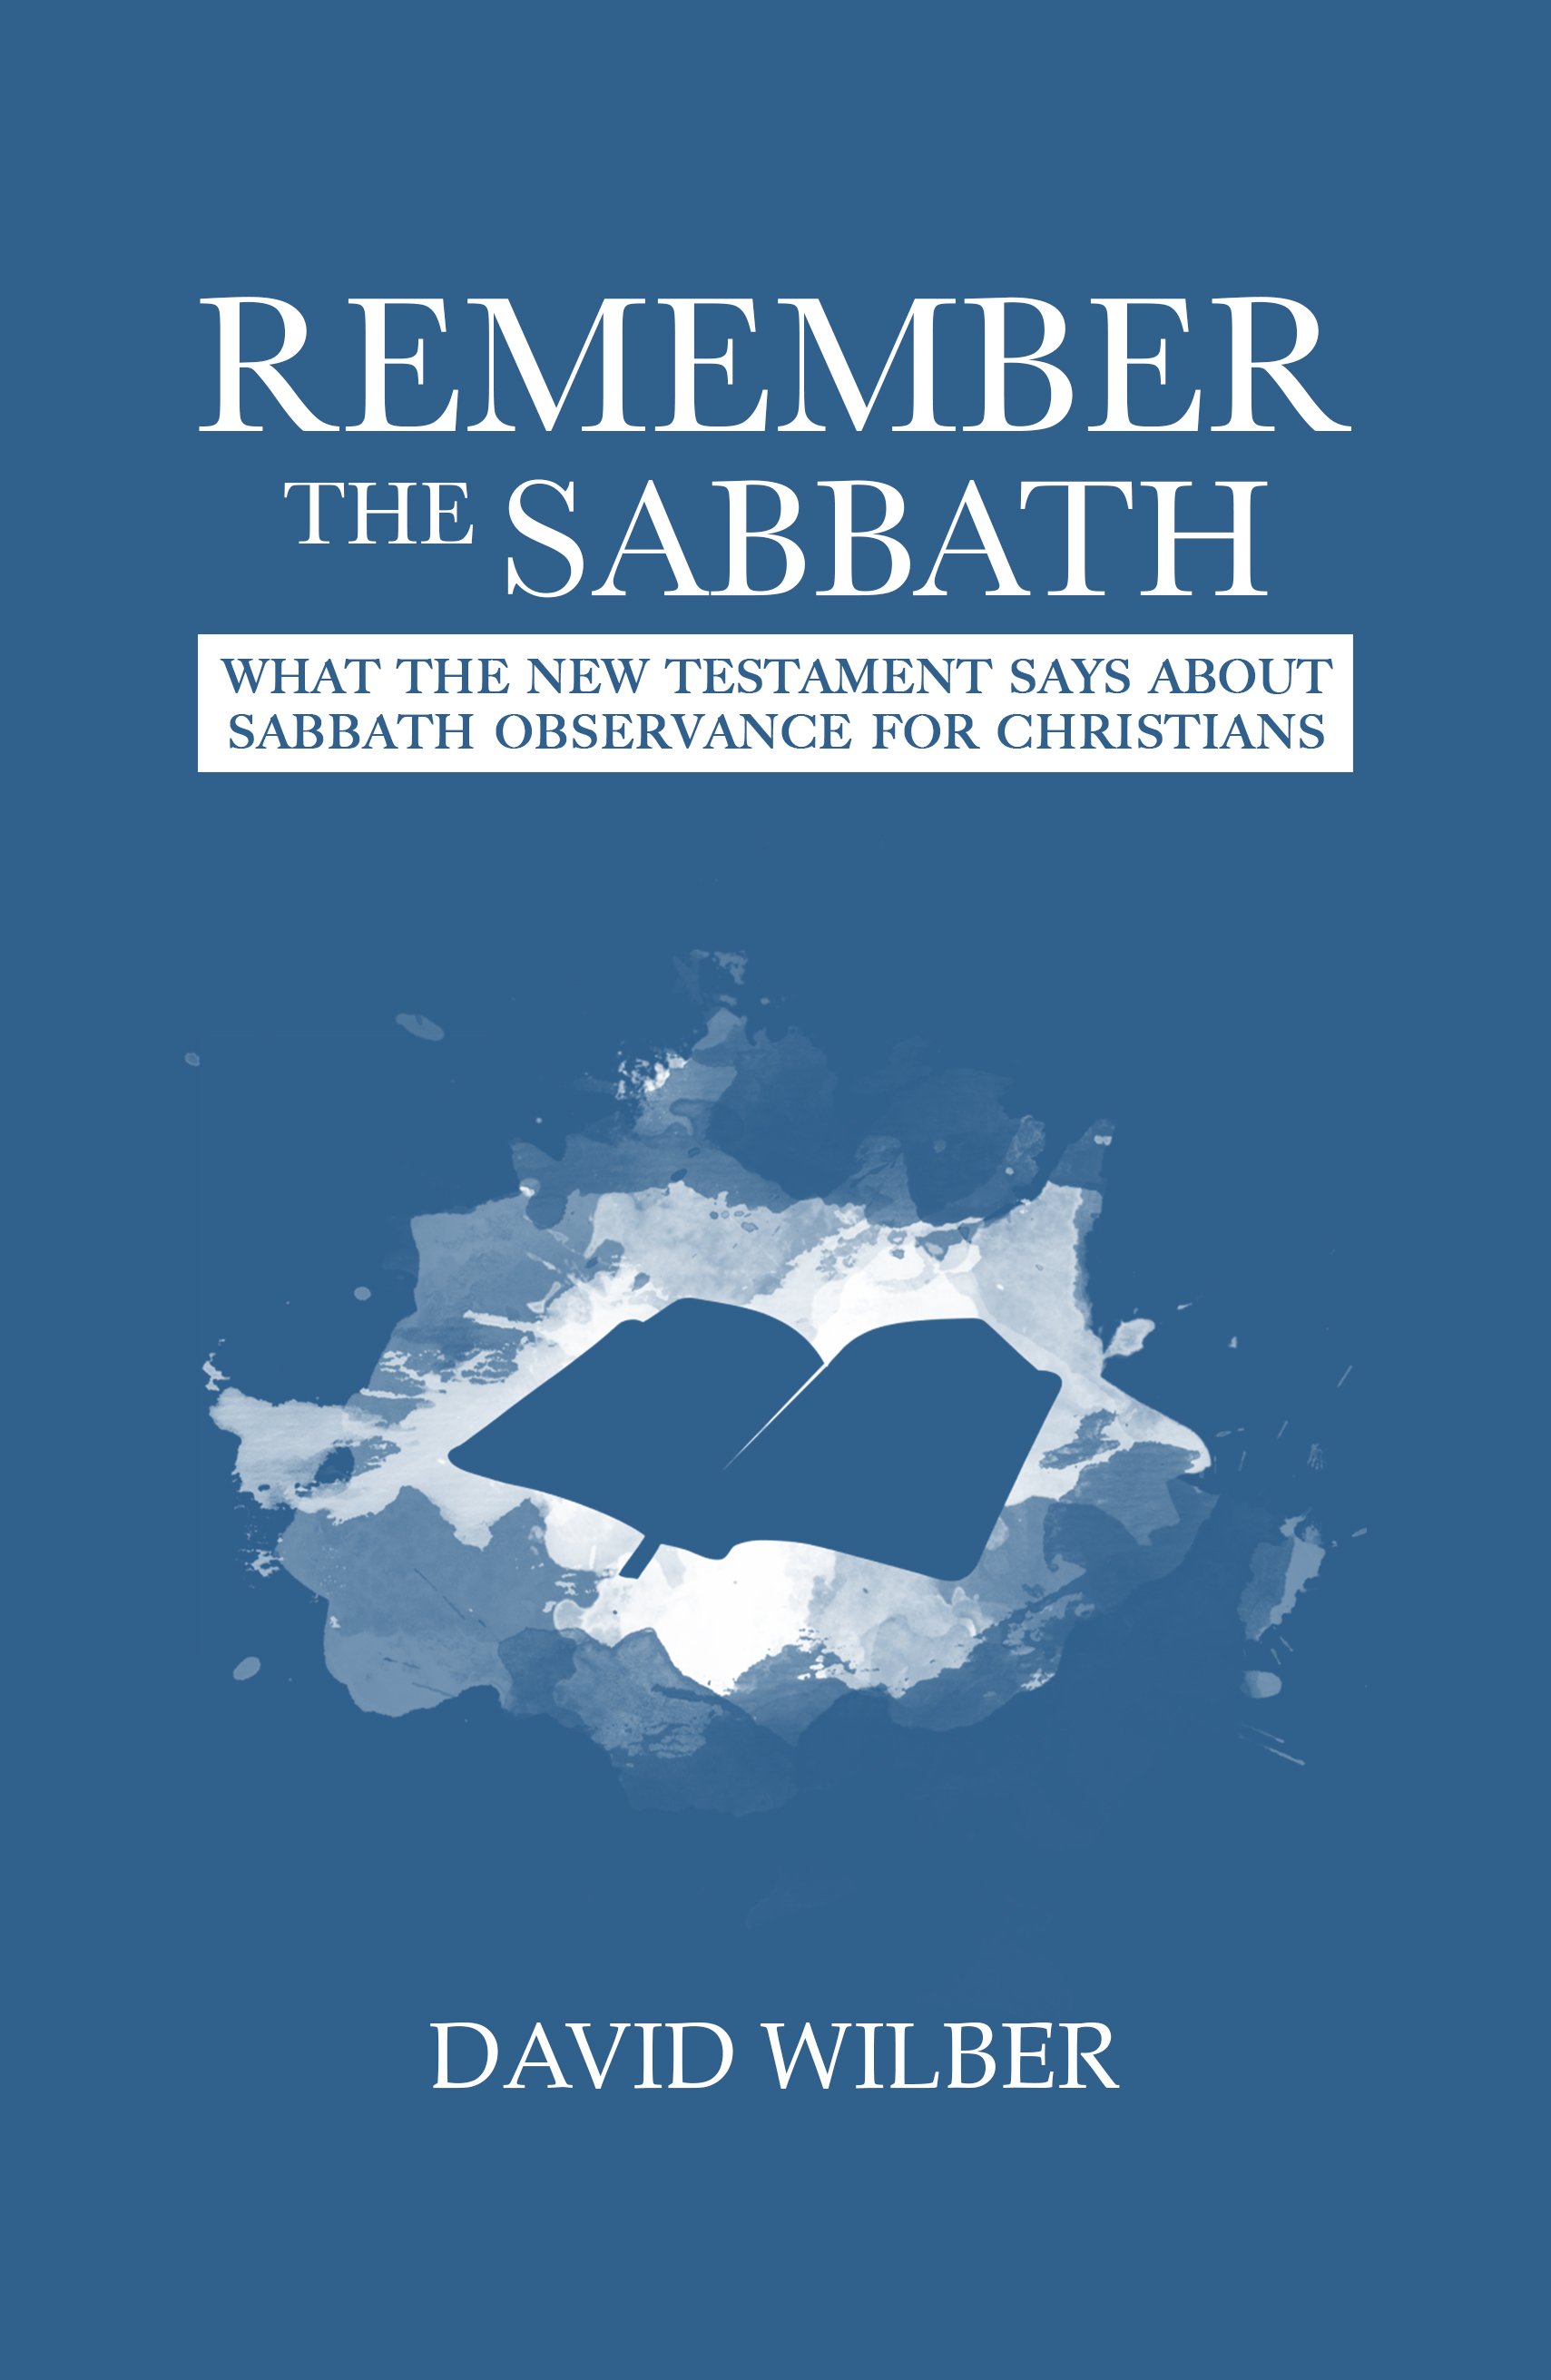 Remember the Sabbath: What the New Testament Says About Sabbath Observance for Christians